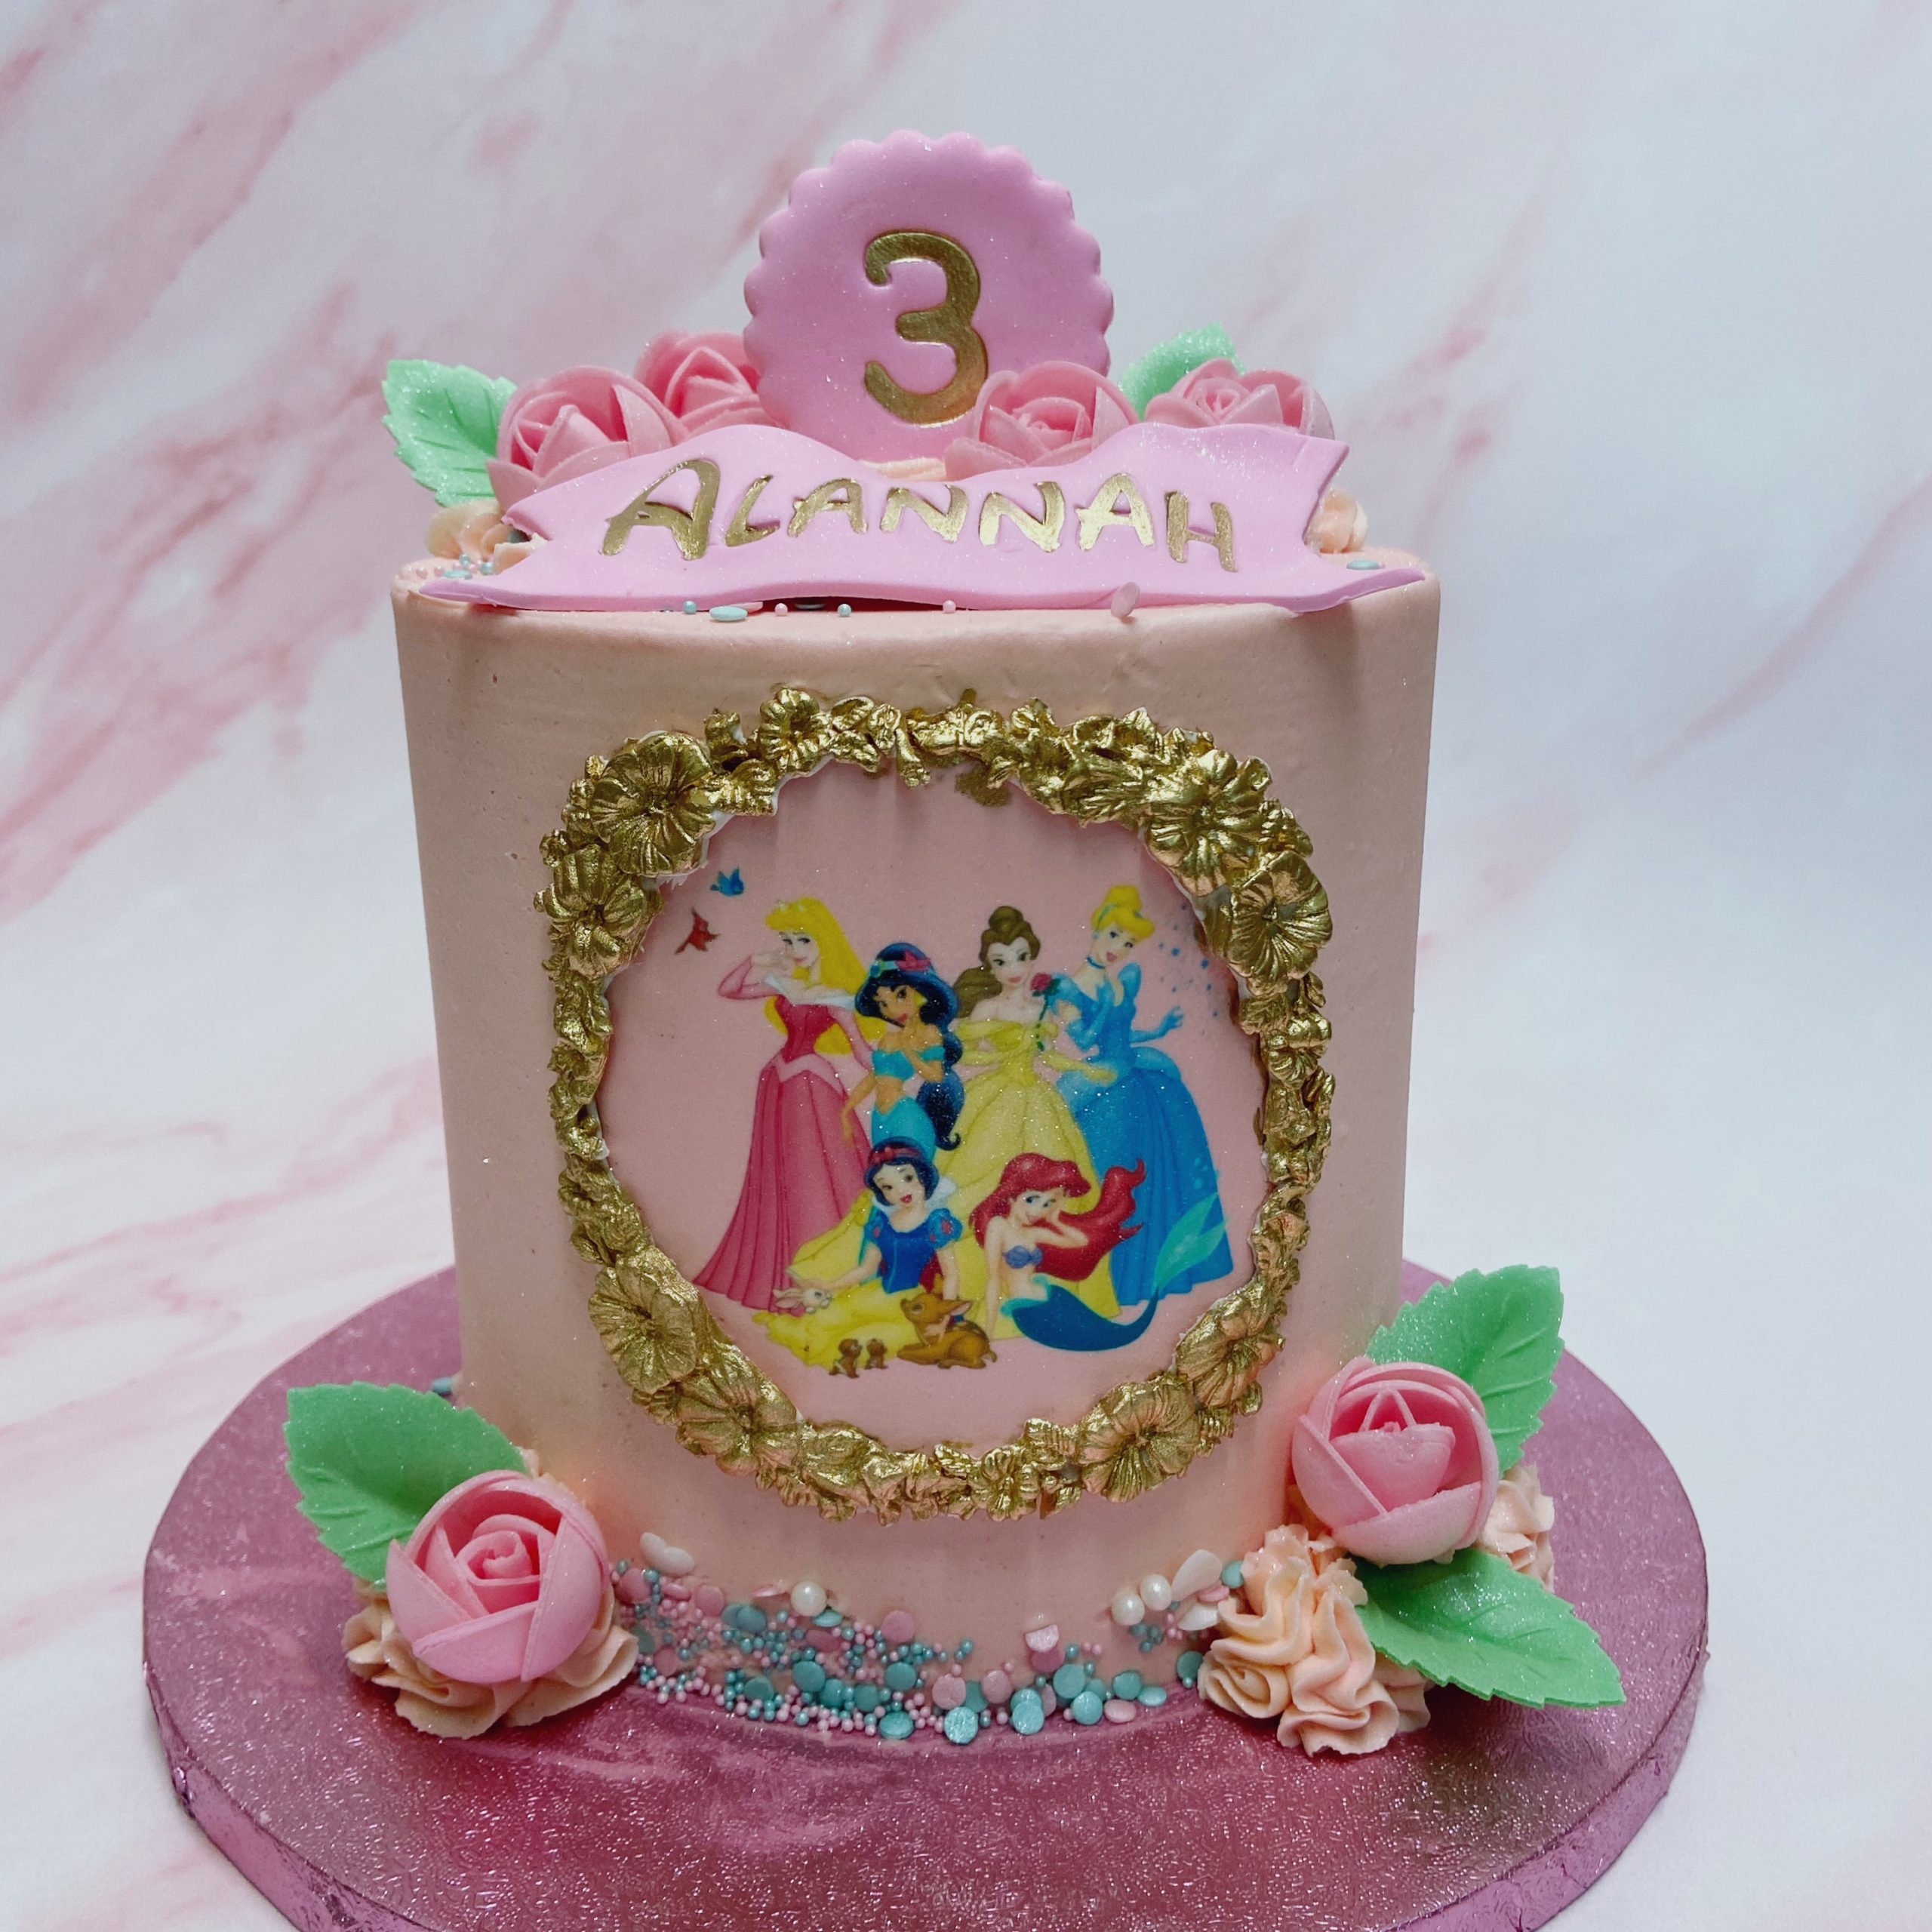 Cinderella buttercream cake in Alimosho - Party, Catering & Event, BAMAT  CAKES AND CONFECTIONERIES | Find more Party, Catering & Event services  online from olist.ng